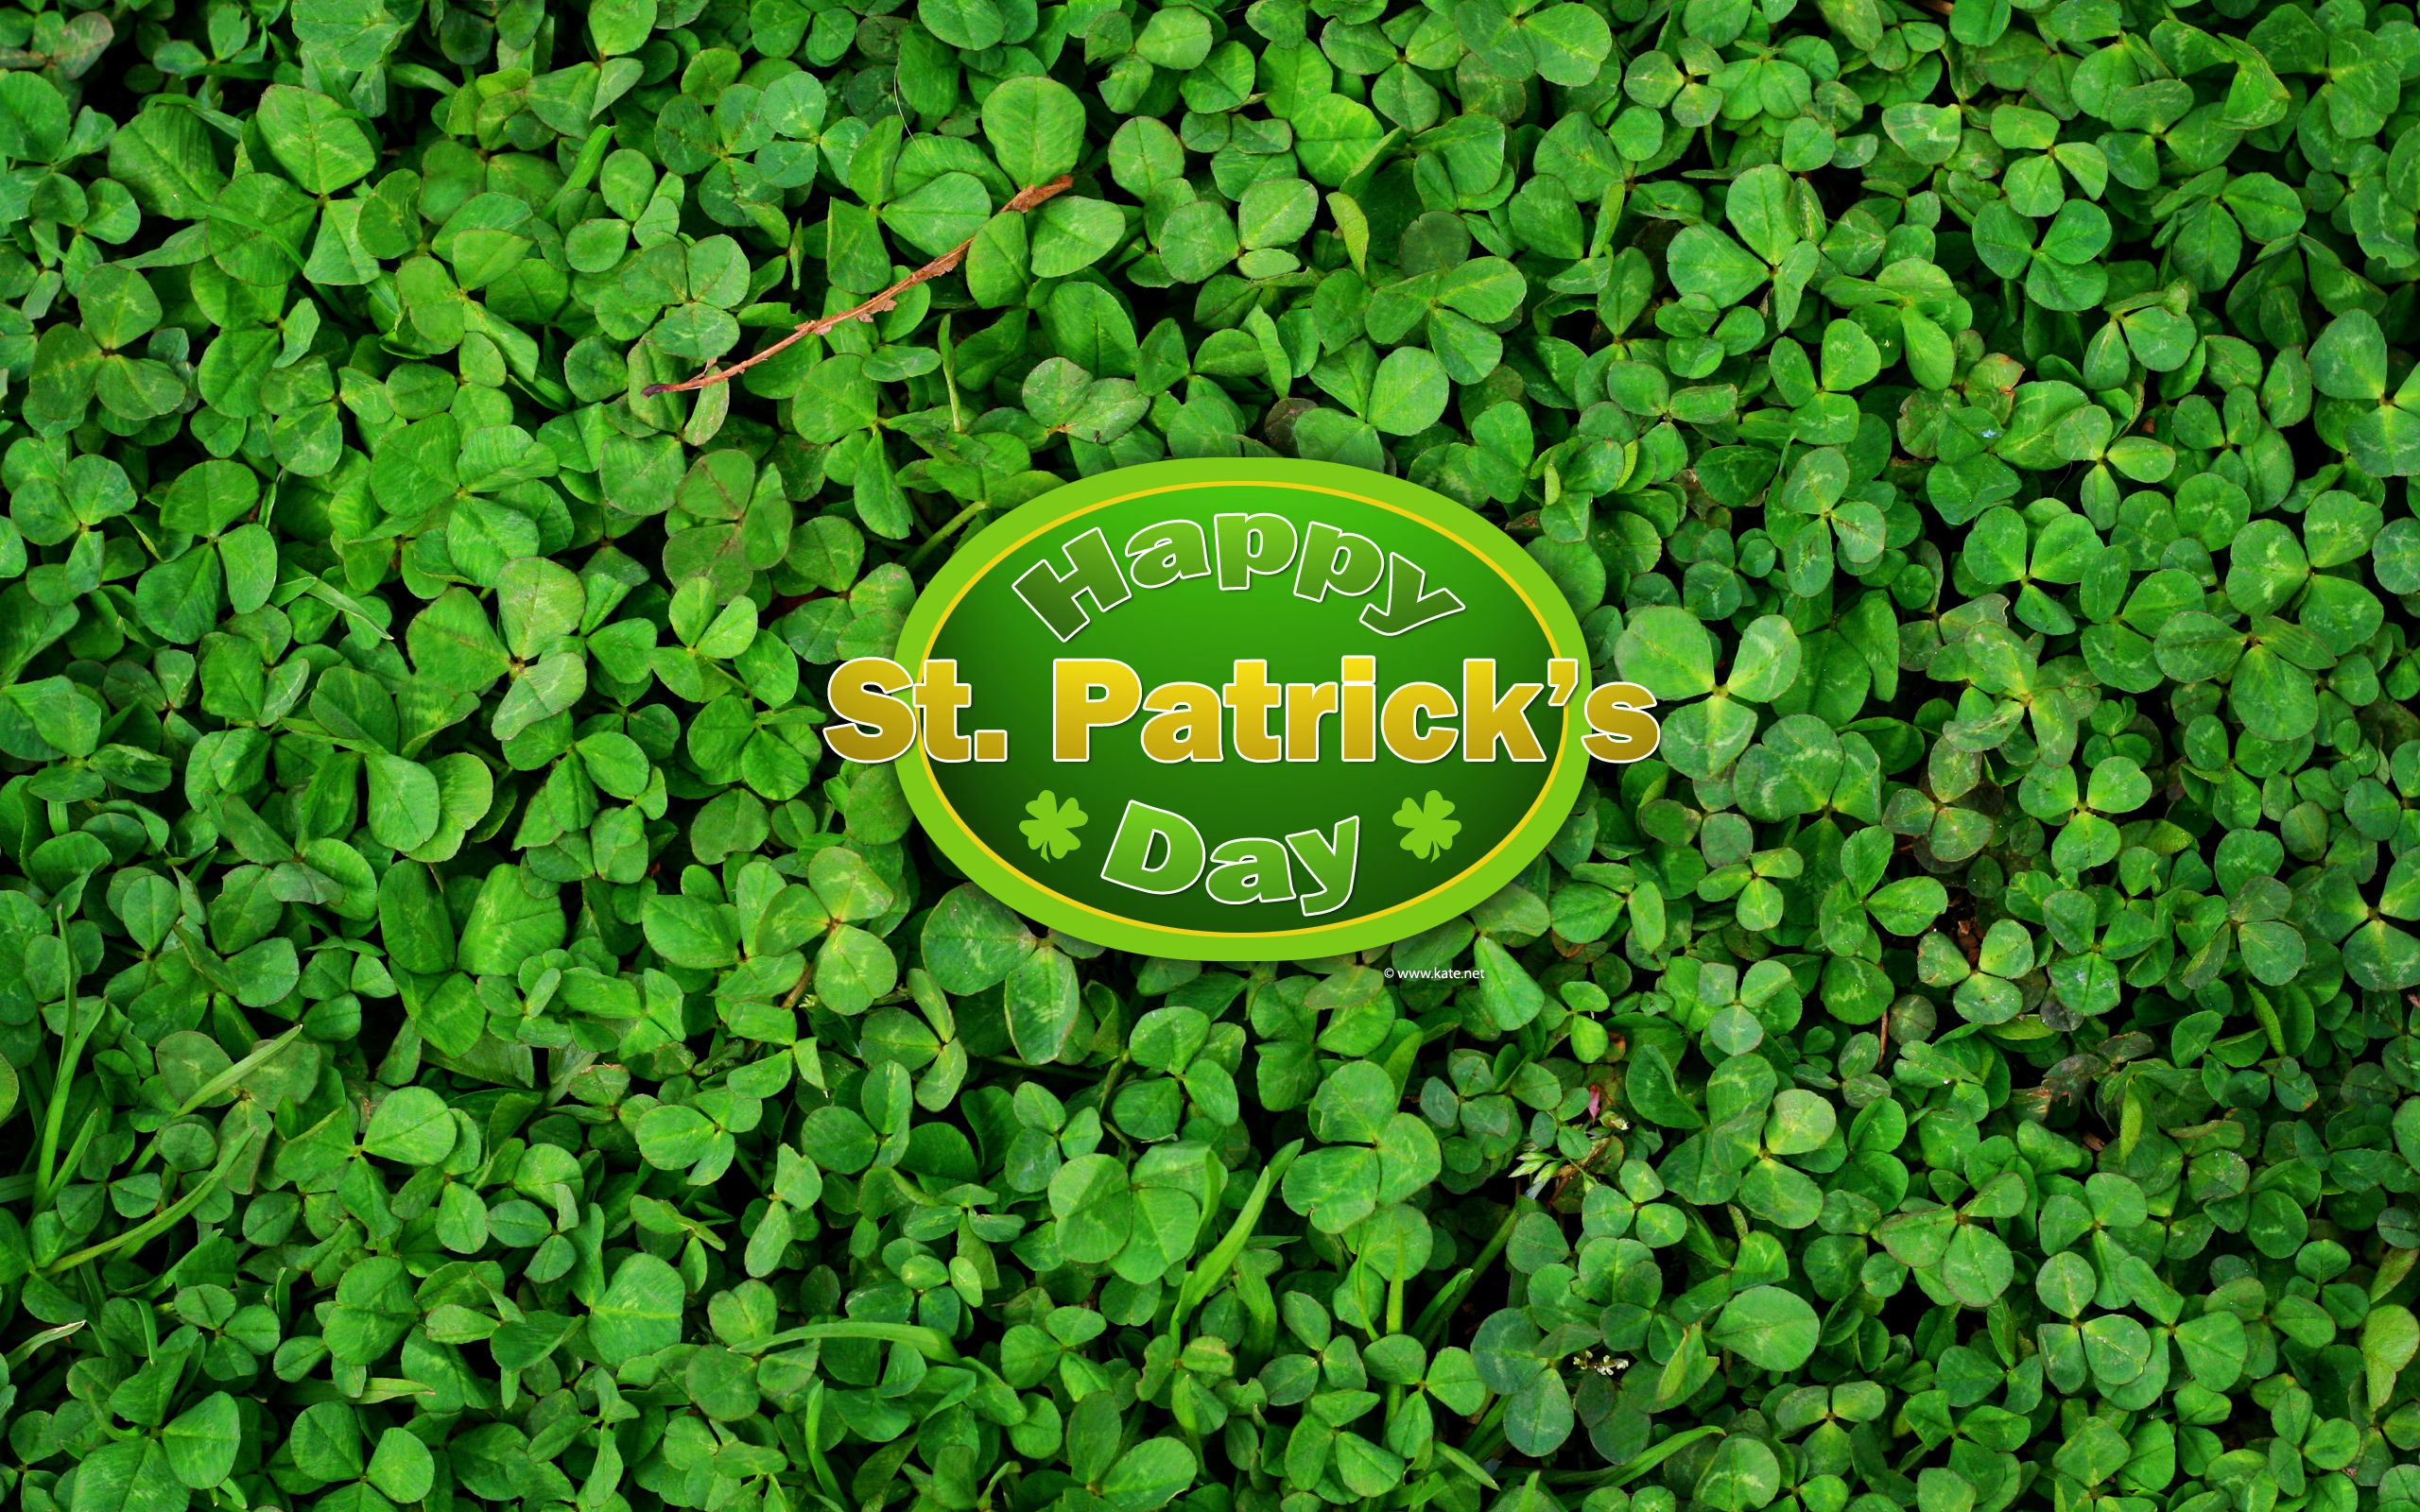 St Patrick S Day Wallpaper By Kate